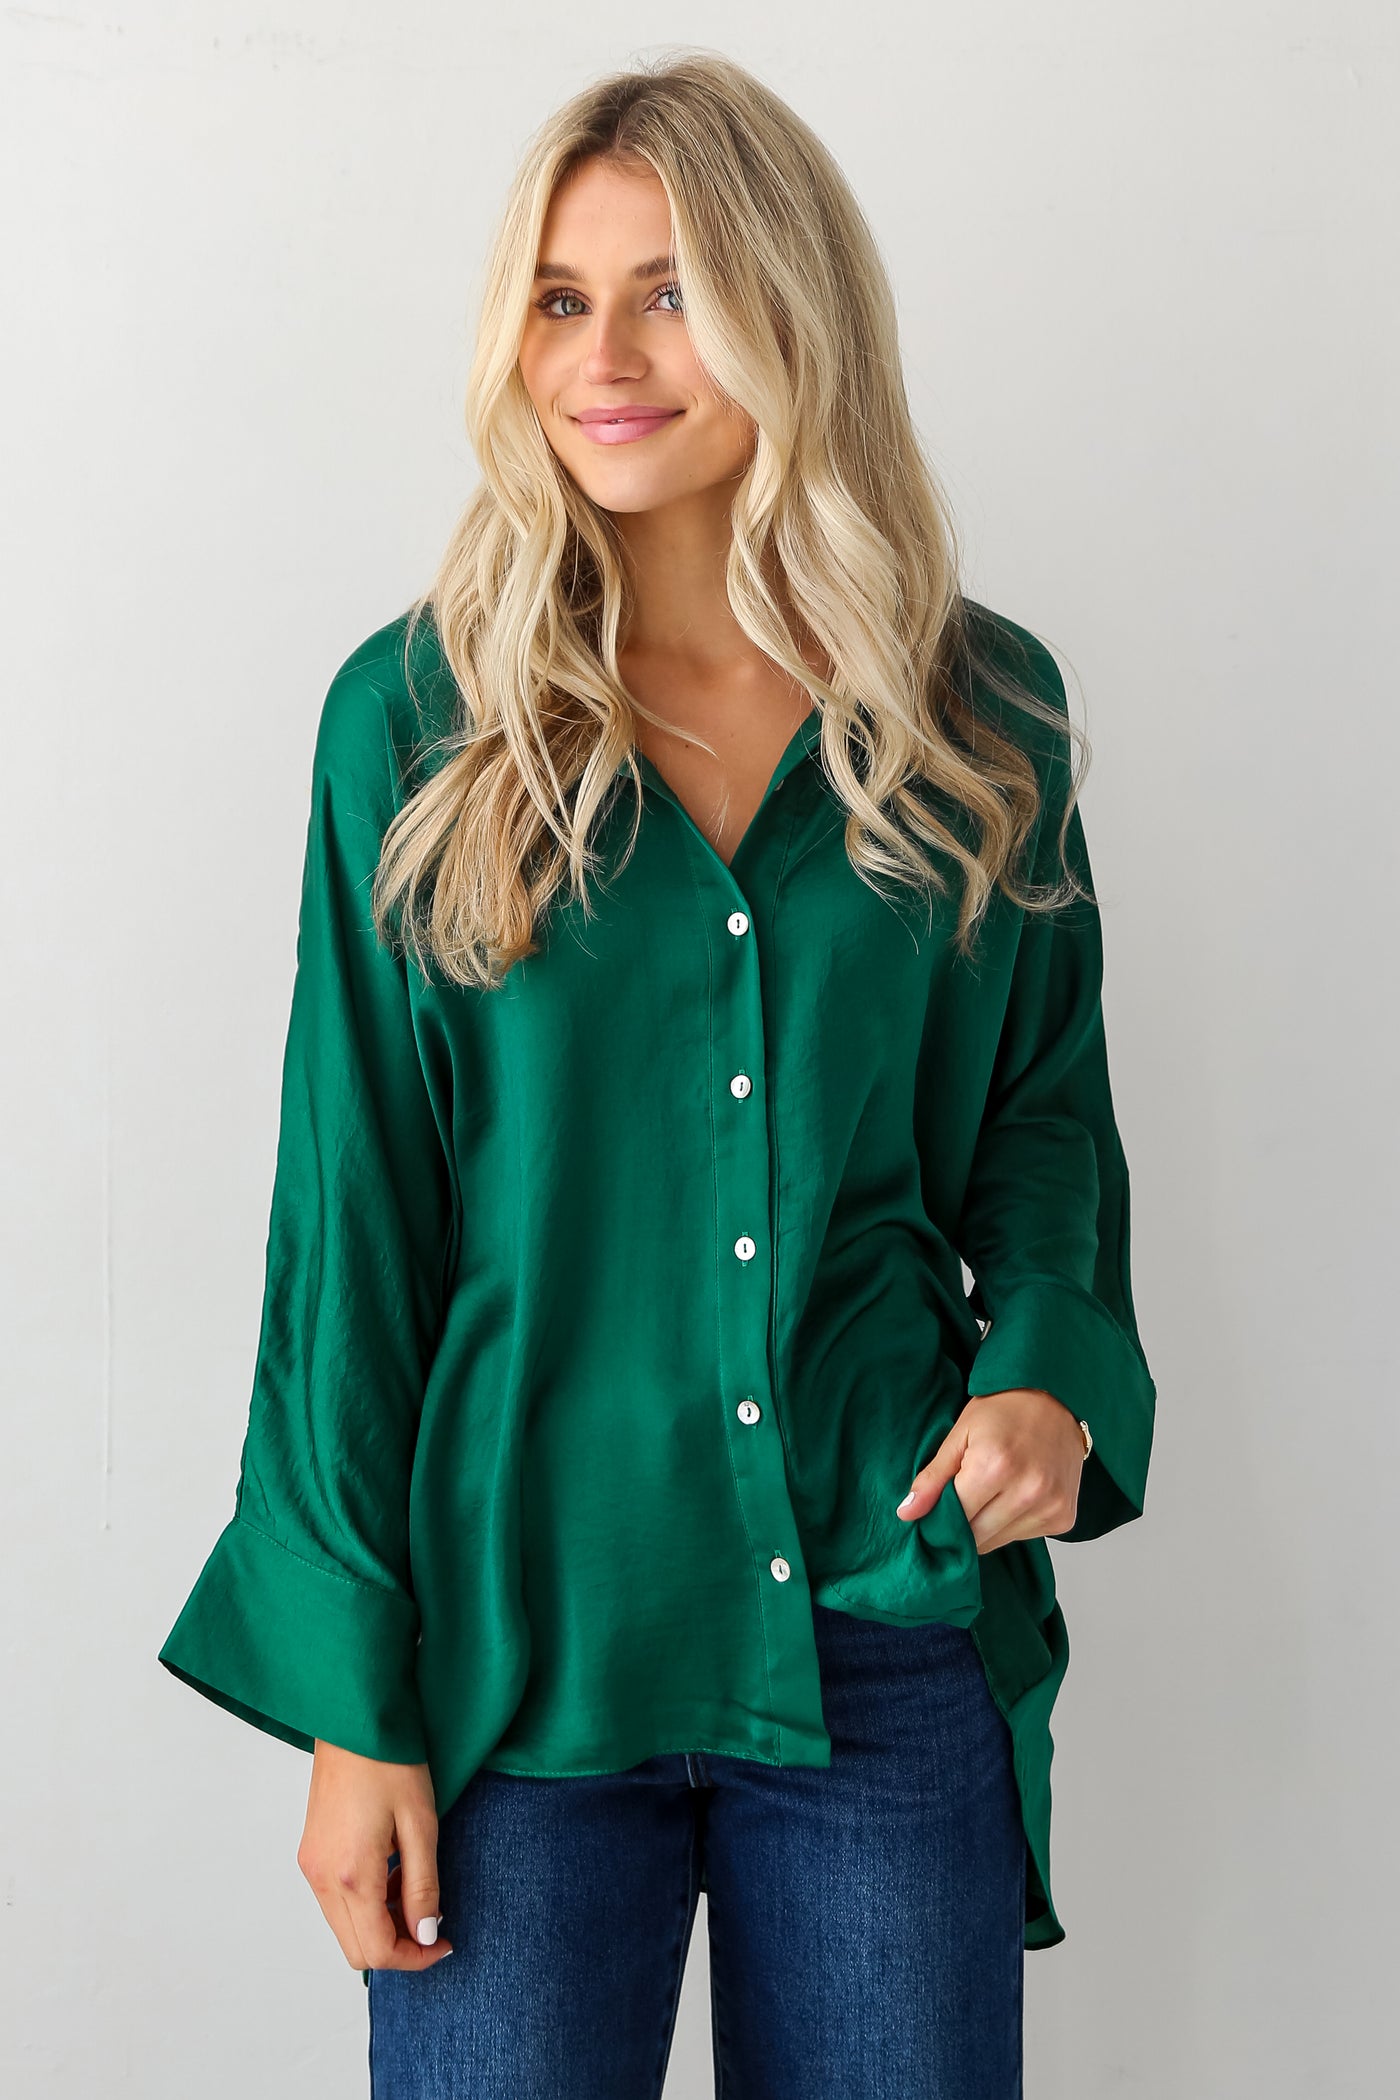 holiday party tops